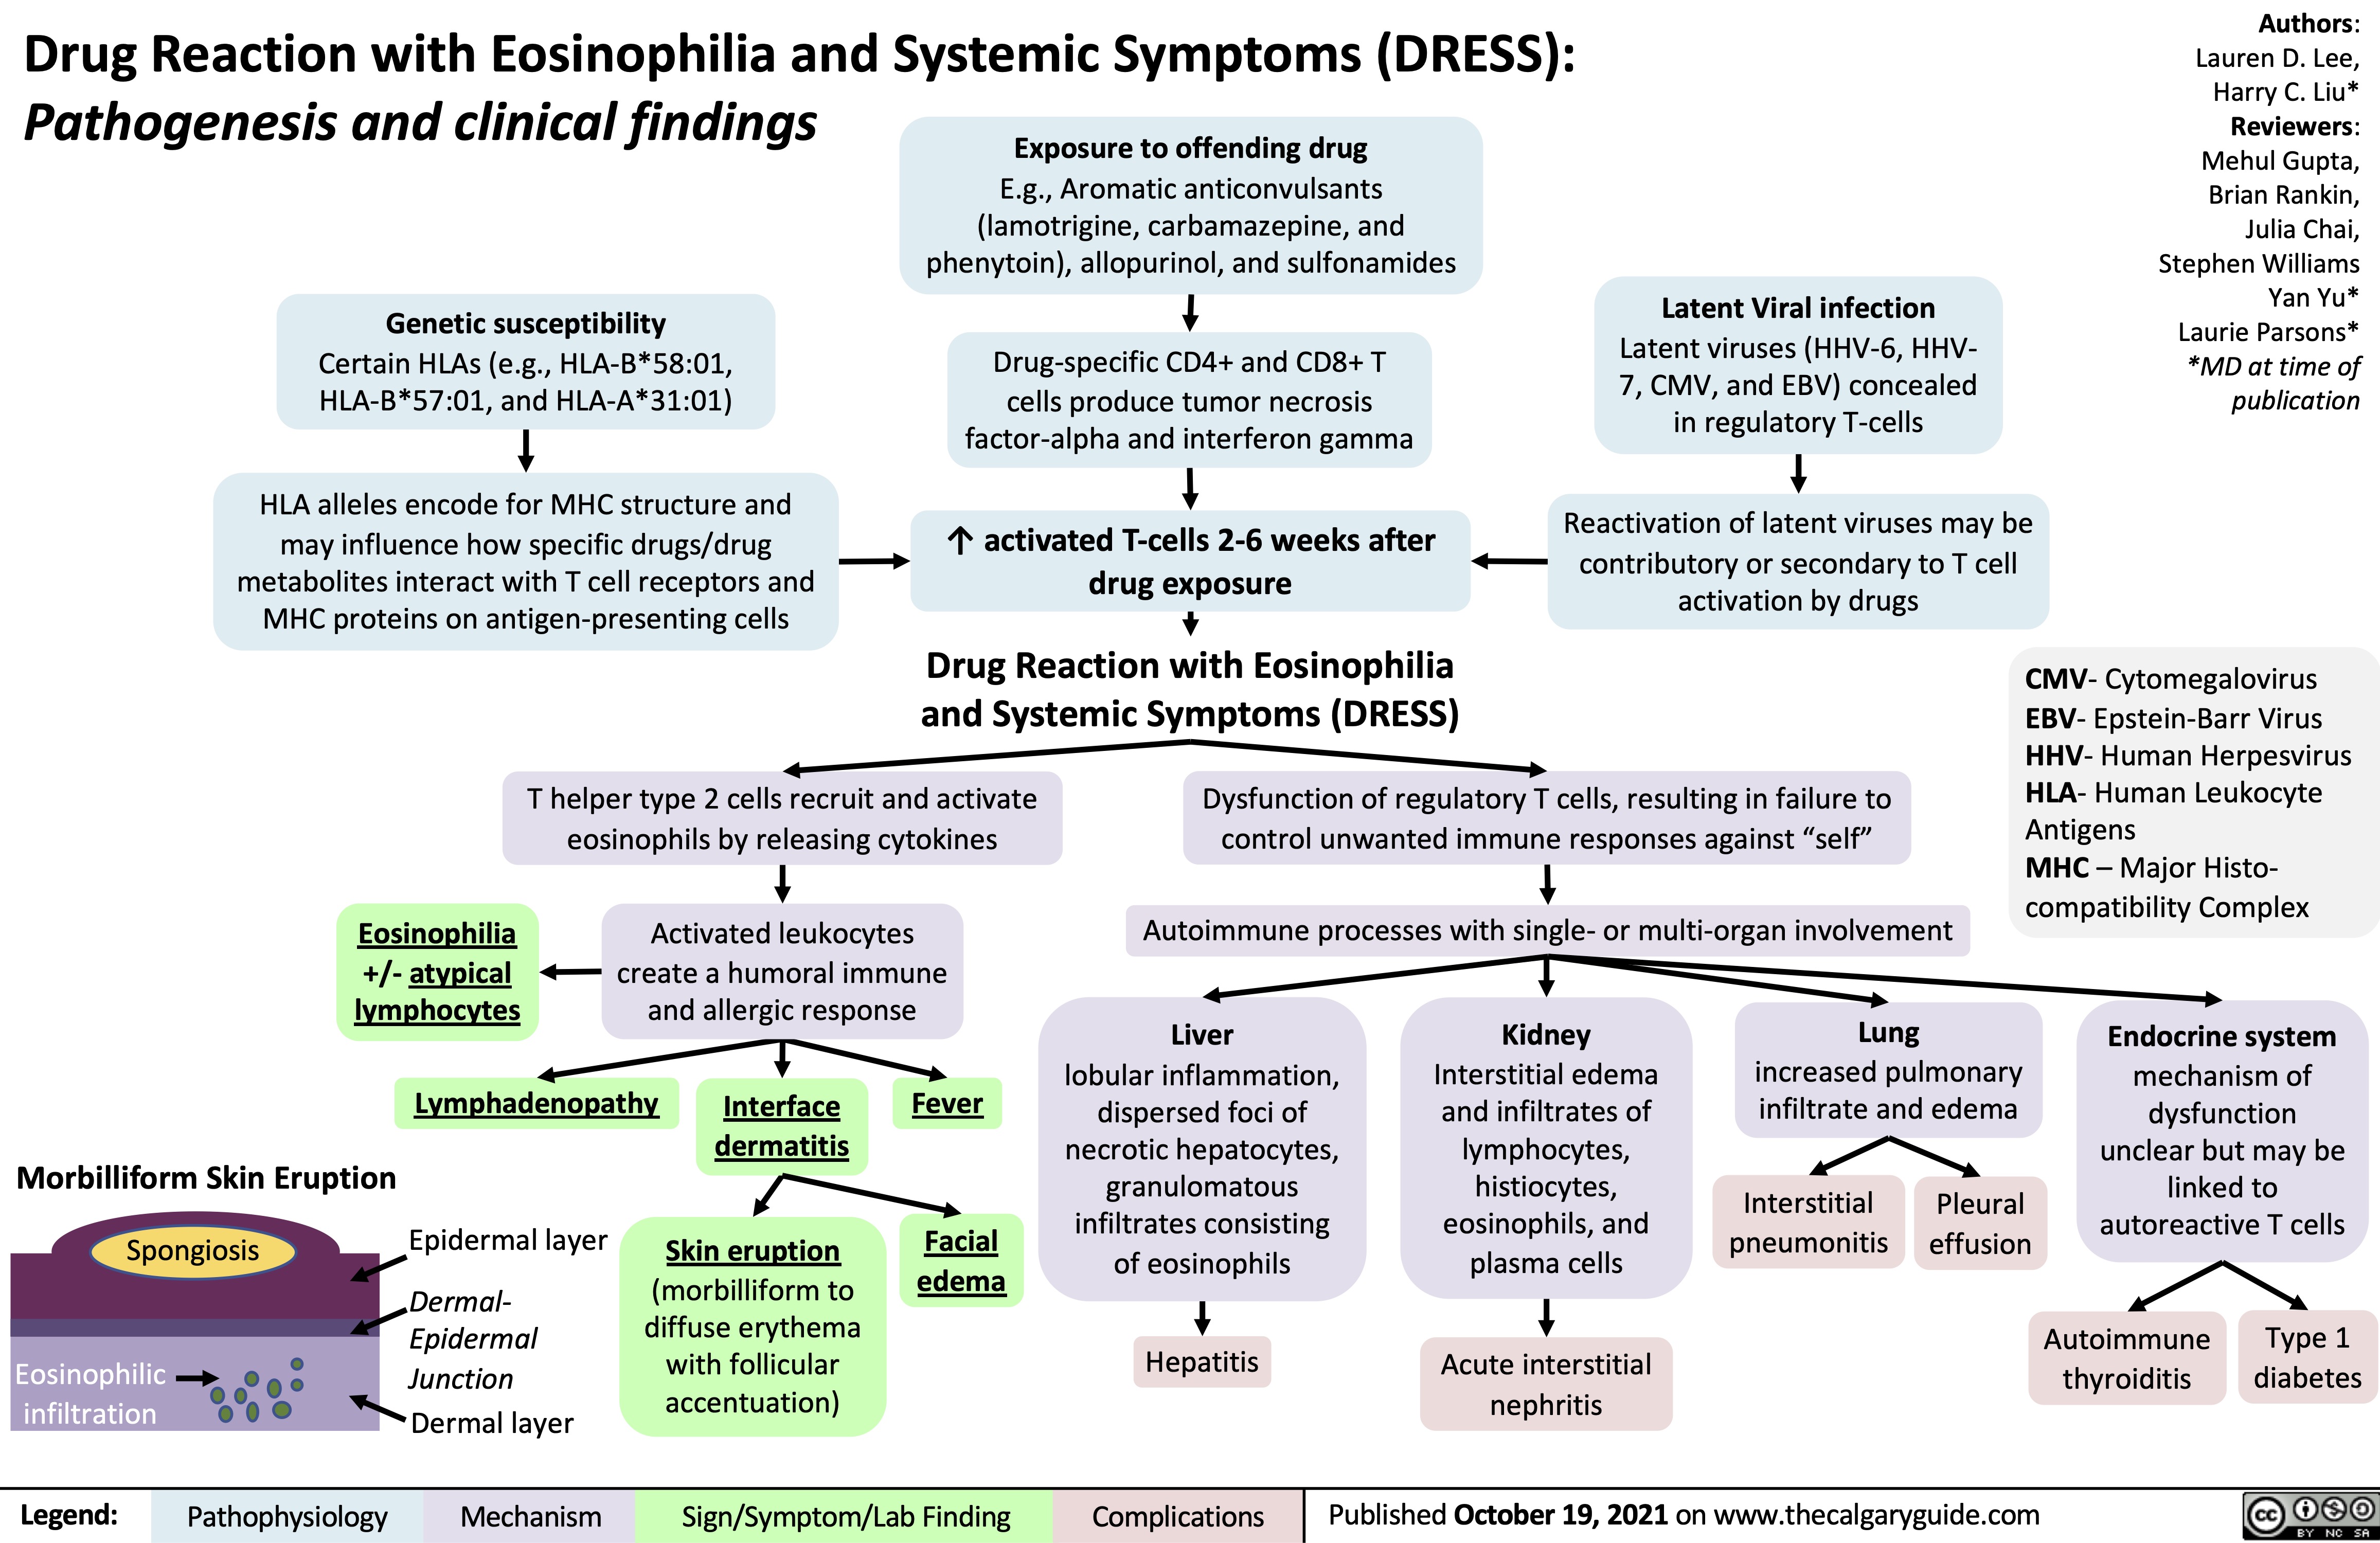 Drug Reaction with Eosinophilia and Systemic Symptoms (DRESS):
Authors: Lauren D. Lee, Harry C. Liu* Reviewers: Mehul Gupta, Brian Rankin, Julia Chai, Stephen Williams Yan Yu* Laurie Parsons* *MD at time of publication
Pathogenesis and clinical findings
Genetic susceptibility
Certain HLAs (e.g., HLA-B*58:01, HLA-B*57:01, and HLA-A*31:01)
HLA alleles encode for MHC structure and may influence how specific drugs/drug metabolites interact with T cell receptors and MHC proteins on antigen-presenting cells
Exposure to offending drug
E.g., Aromatic anticonvulsants (lamotrigine, carbamazepine, and phenytoin), allopurinol, and sulfonamides
Drug-specific CD4+ and CD8+ T cells produce tumor necrosis factor-alpha and interferon gamma
↑ activated T-cells 2-6 weeks after drug exposure
Drug Reaction with Eosinophilia and Systemic Symptoms (DRESS)
Latent Viral infection
Latent viruses (HHV-6, HHV- 7, CMV, and EBV) concealed in regulatory T-cells
Reactivation of latent viruses may be contributory or secondary to T cell activation by drugs
               Eosinophilia +/- atypical lymphocytes
T helper type 2 cells recruit and activate eosinophils by releasing cytokines
Activated leukocytes create a humoral immune and allergic response
Dysfunction of regulatory T cells, resulting in failure to control unwanted immune responses against “self”
Autoimmune processes with single- or multi-organ involvement
CMV- Cytomegalovirus EBV- Epstein-Barr Virus HHV- Human Herpesvirus HLA- Human Leukocyte Antigens
MHC – Major Histo- compatibility Complex
Endocrine system
mechanism of dysfunction unclear but may be linked to autoreactive T cells
Autoimmune Type 1 thyroiditis diabetes
             Lymphadenopathy
Fever
Facial edema
Liver
lobular inflammation, dispersed foci of necrotic hepatocytes, granulomatous infiltrates consisting of eosinophils
Hepatitis
Kidney
Interstitial edema and infiltrates of lymphocytes, histiocytes, eosinophils, and plasma cells
Acute interstitial nephritis
Lung
increased pulmonary infiltrate and edema
 Morbilliform Skin Eruption
Spongiosis
Epidermal layer
Dermal- Epidermal Junction Dermal layer
Interface dermatitis
Skin eruption
(morbilliform to diffuse erythema with follicular accentuation)
Interstitial pneumonitis
Pleural effusion
              Eosinophilic infiltration
 Legend:
 Pathophysiology
 Mechanism
Sign/Symptom/Lab Finding
 Complications
 Published October 19, 2021 on www.thecalgaryguide.com
  